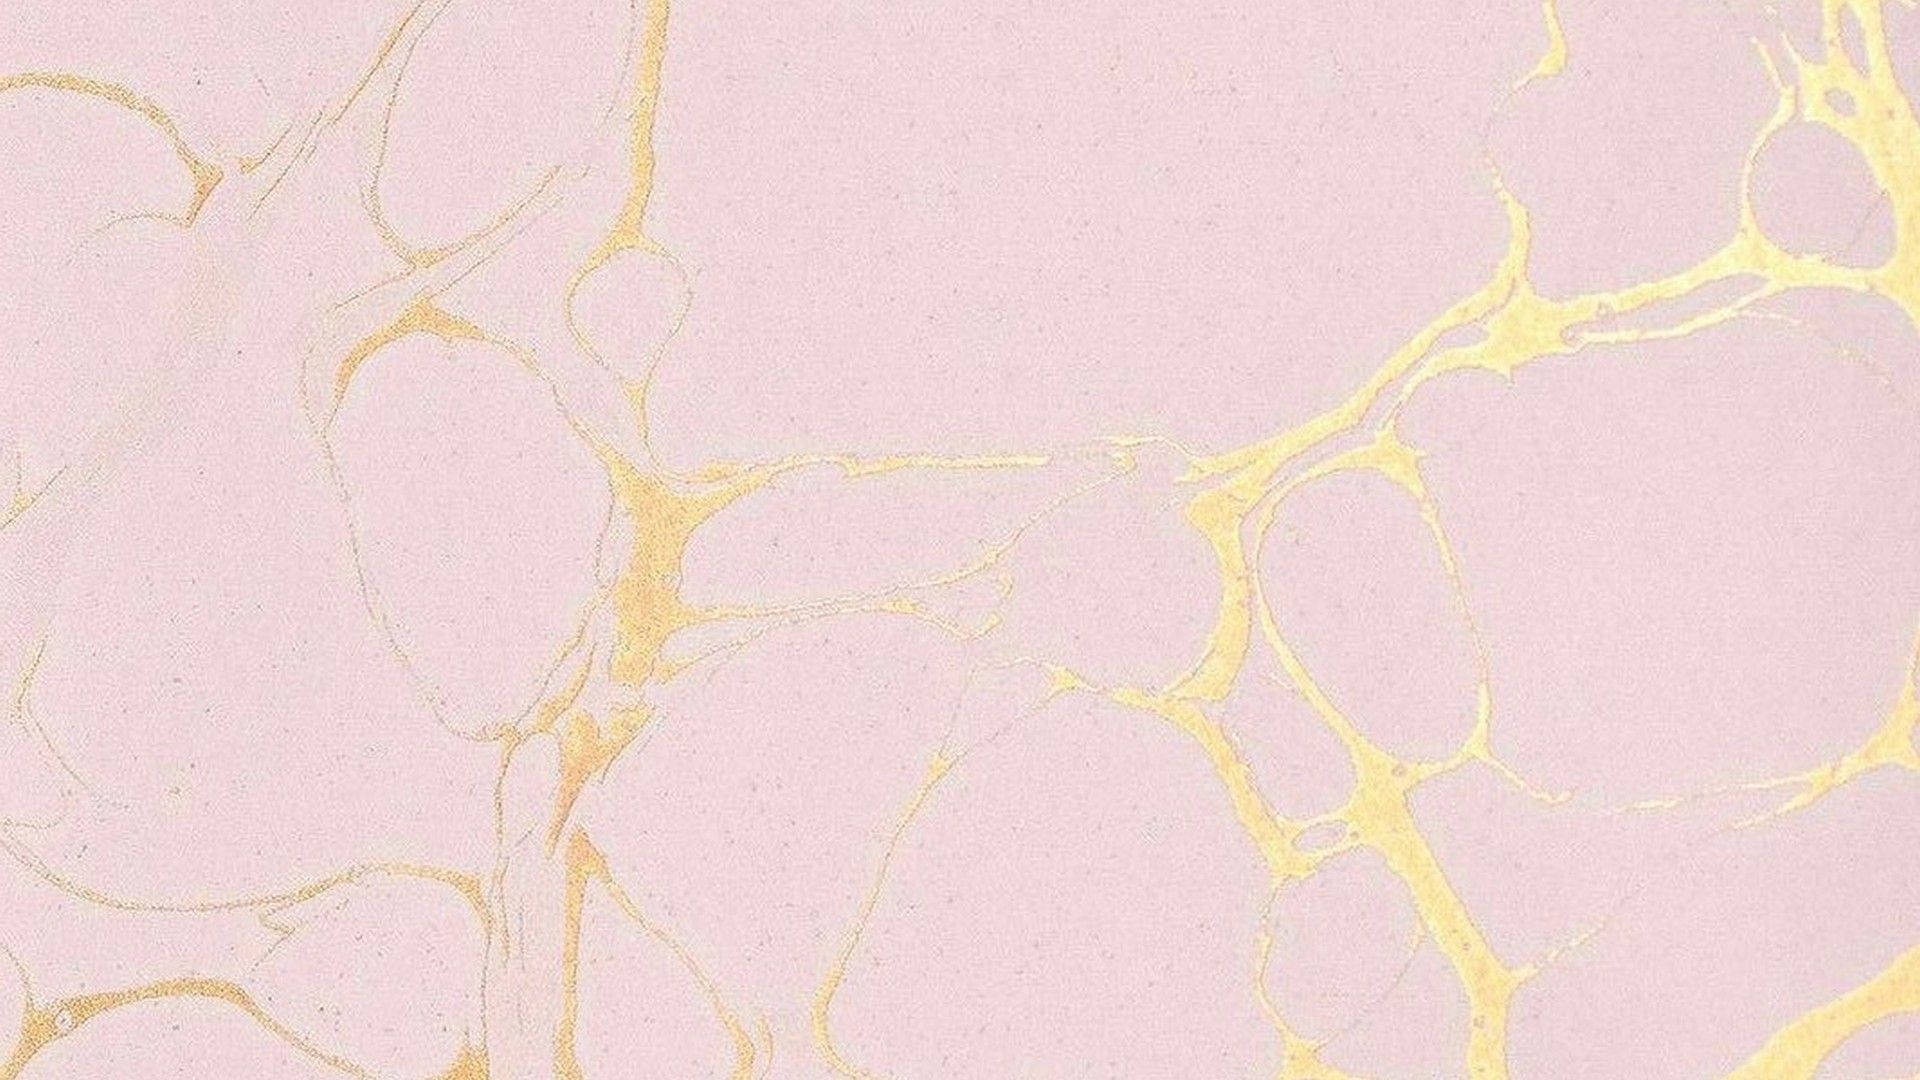 Aesthetic Marble Design Pink And Gold Wallpaper